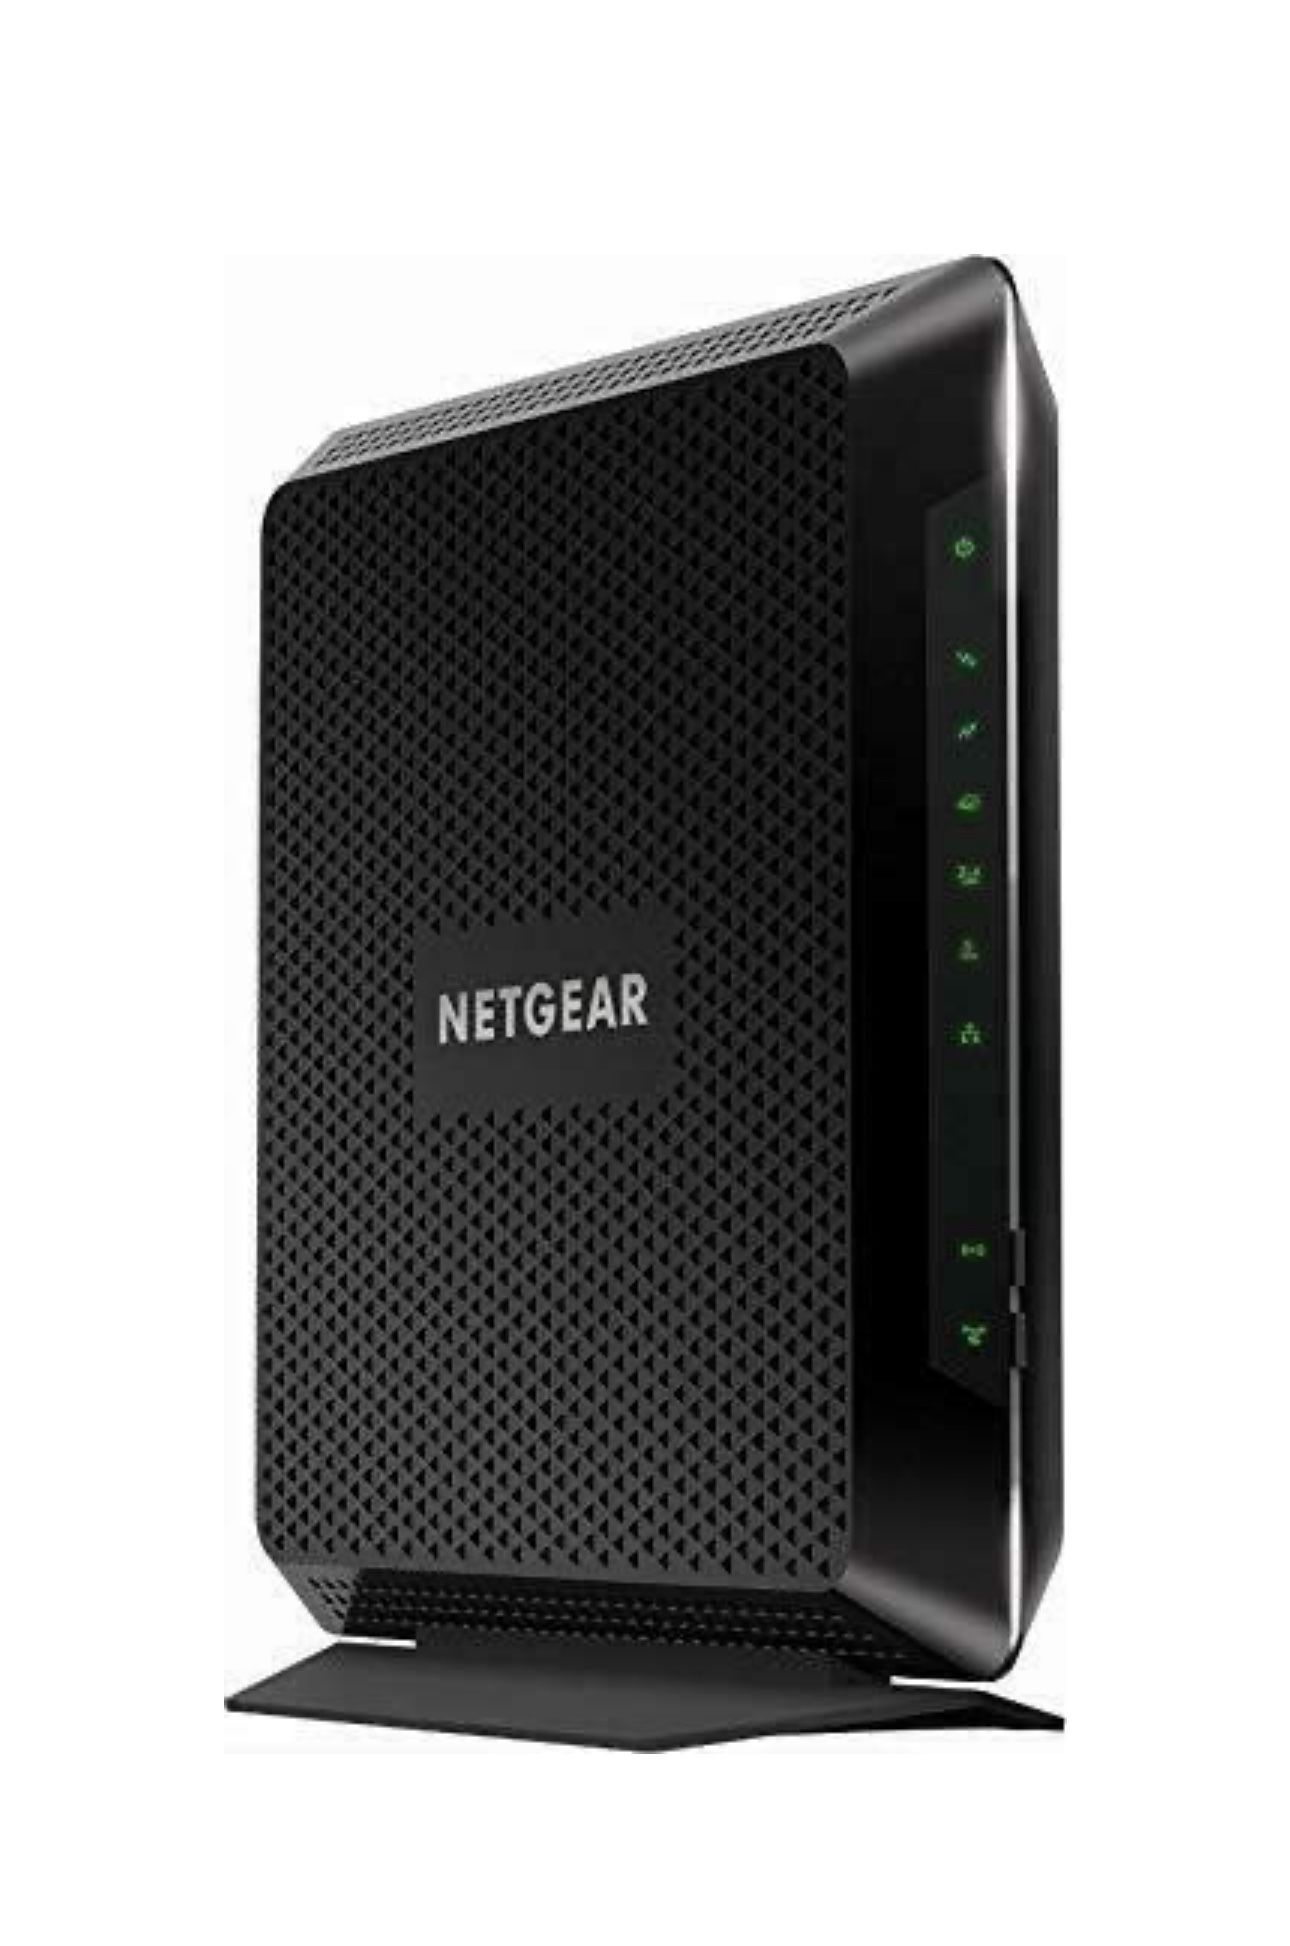 NETGEAR Nighthawk AC1900 (24x8) DOCSIS 3.0 WiFi Cable Modem Router Combo (C7000) compatible with Xfinity or Comcast or Spectrum or Frontier